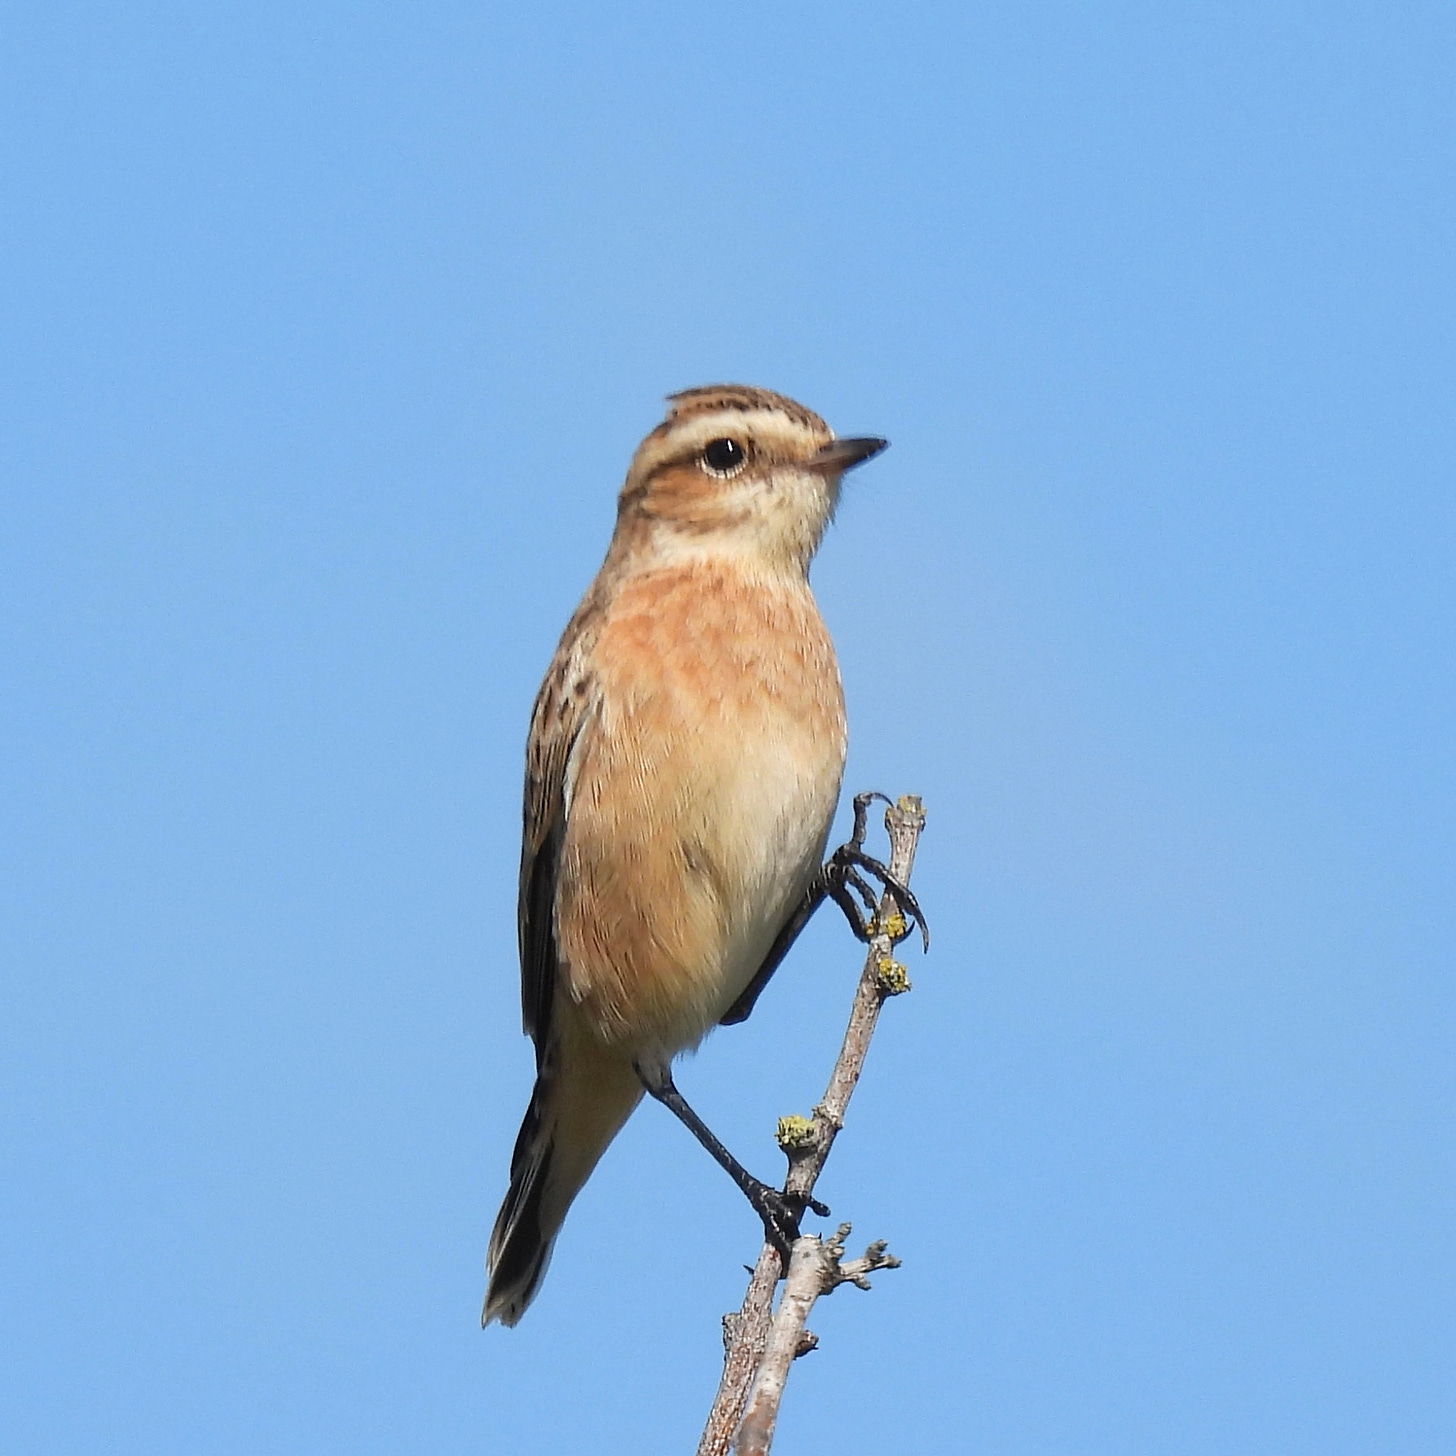 Peach-coloured bird perches on top of a twig against a blue sky, looking to the right of the frame